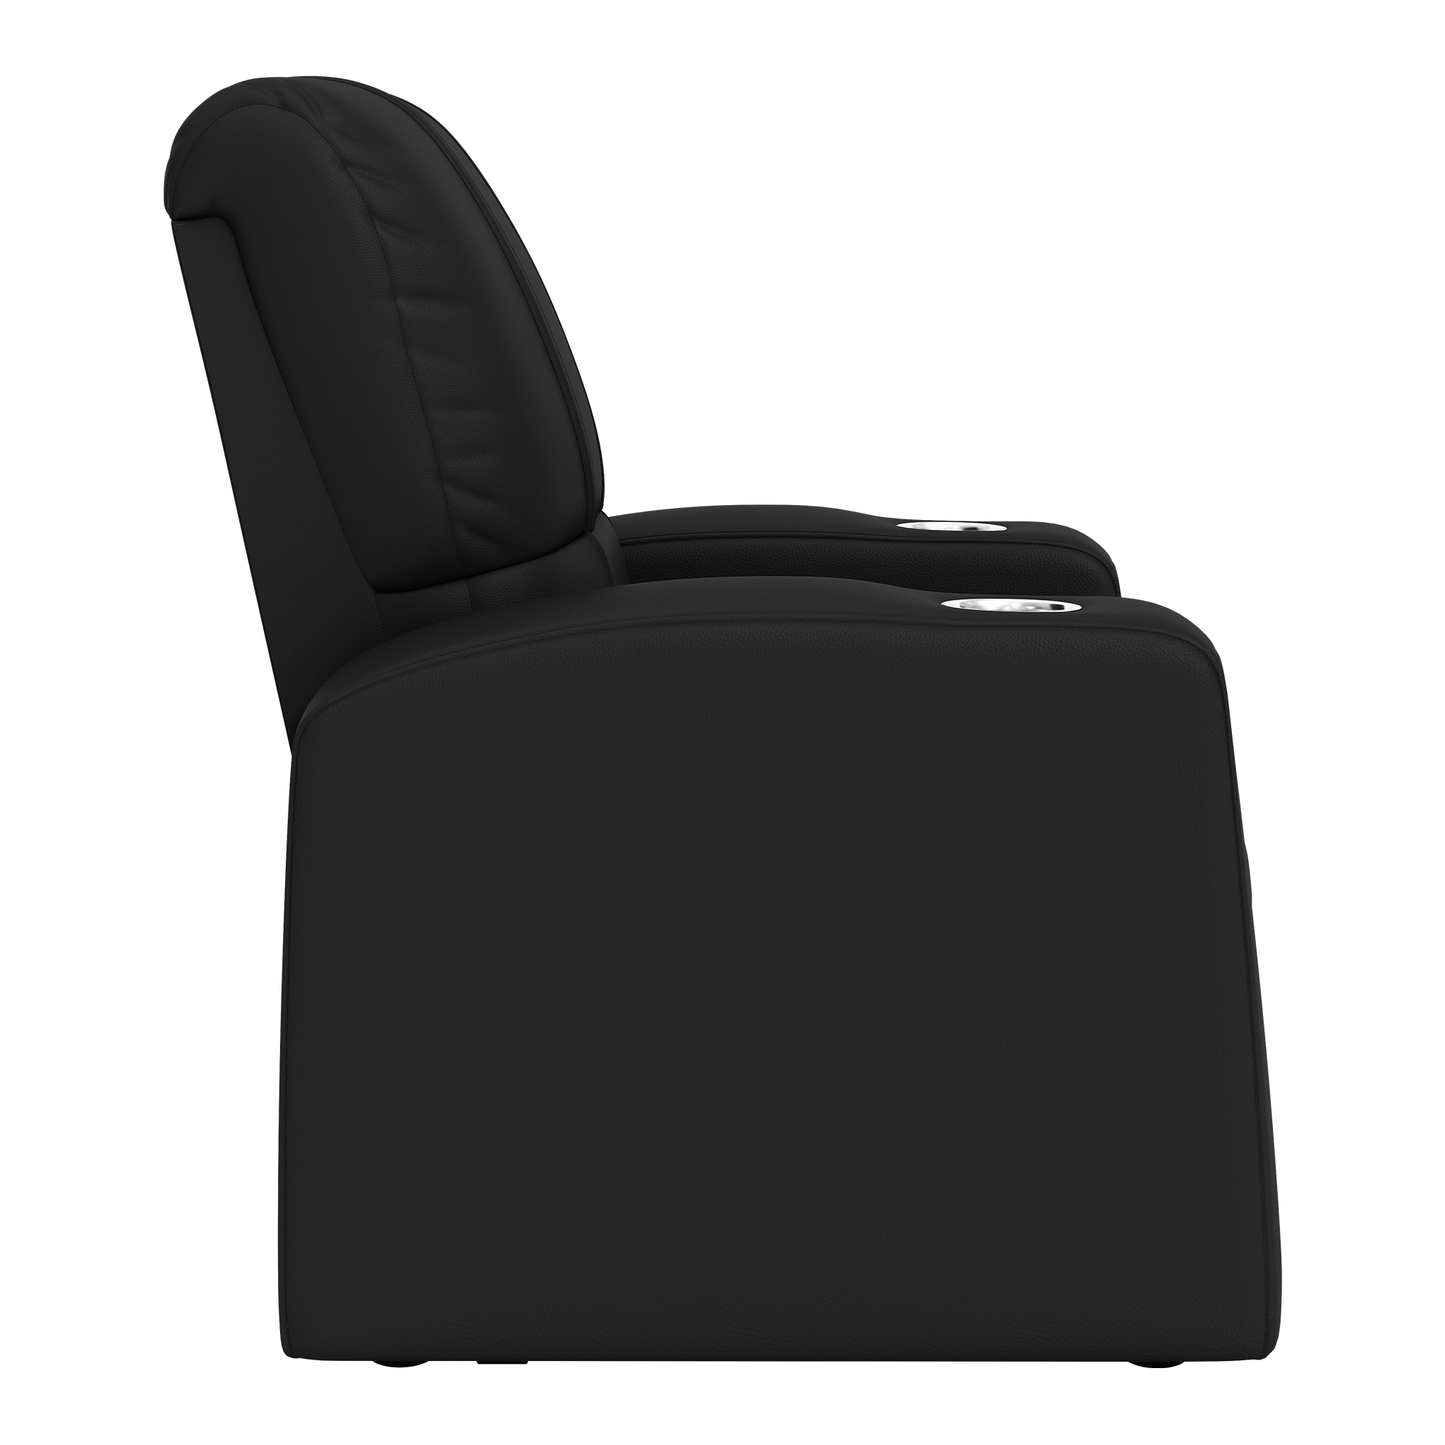 Relax Home Theater Recliner with Knicks Gaming Global Logo